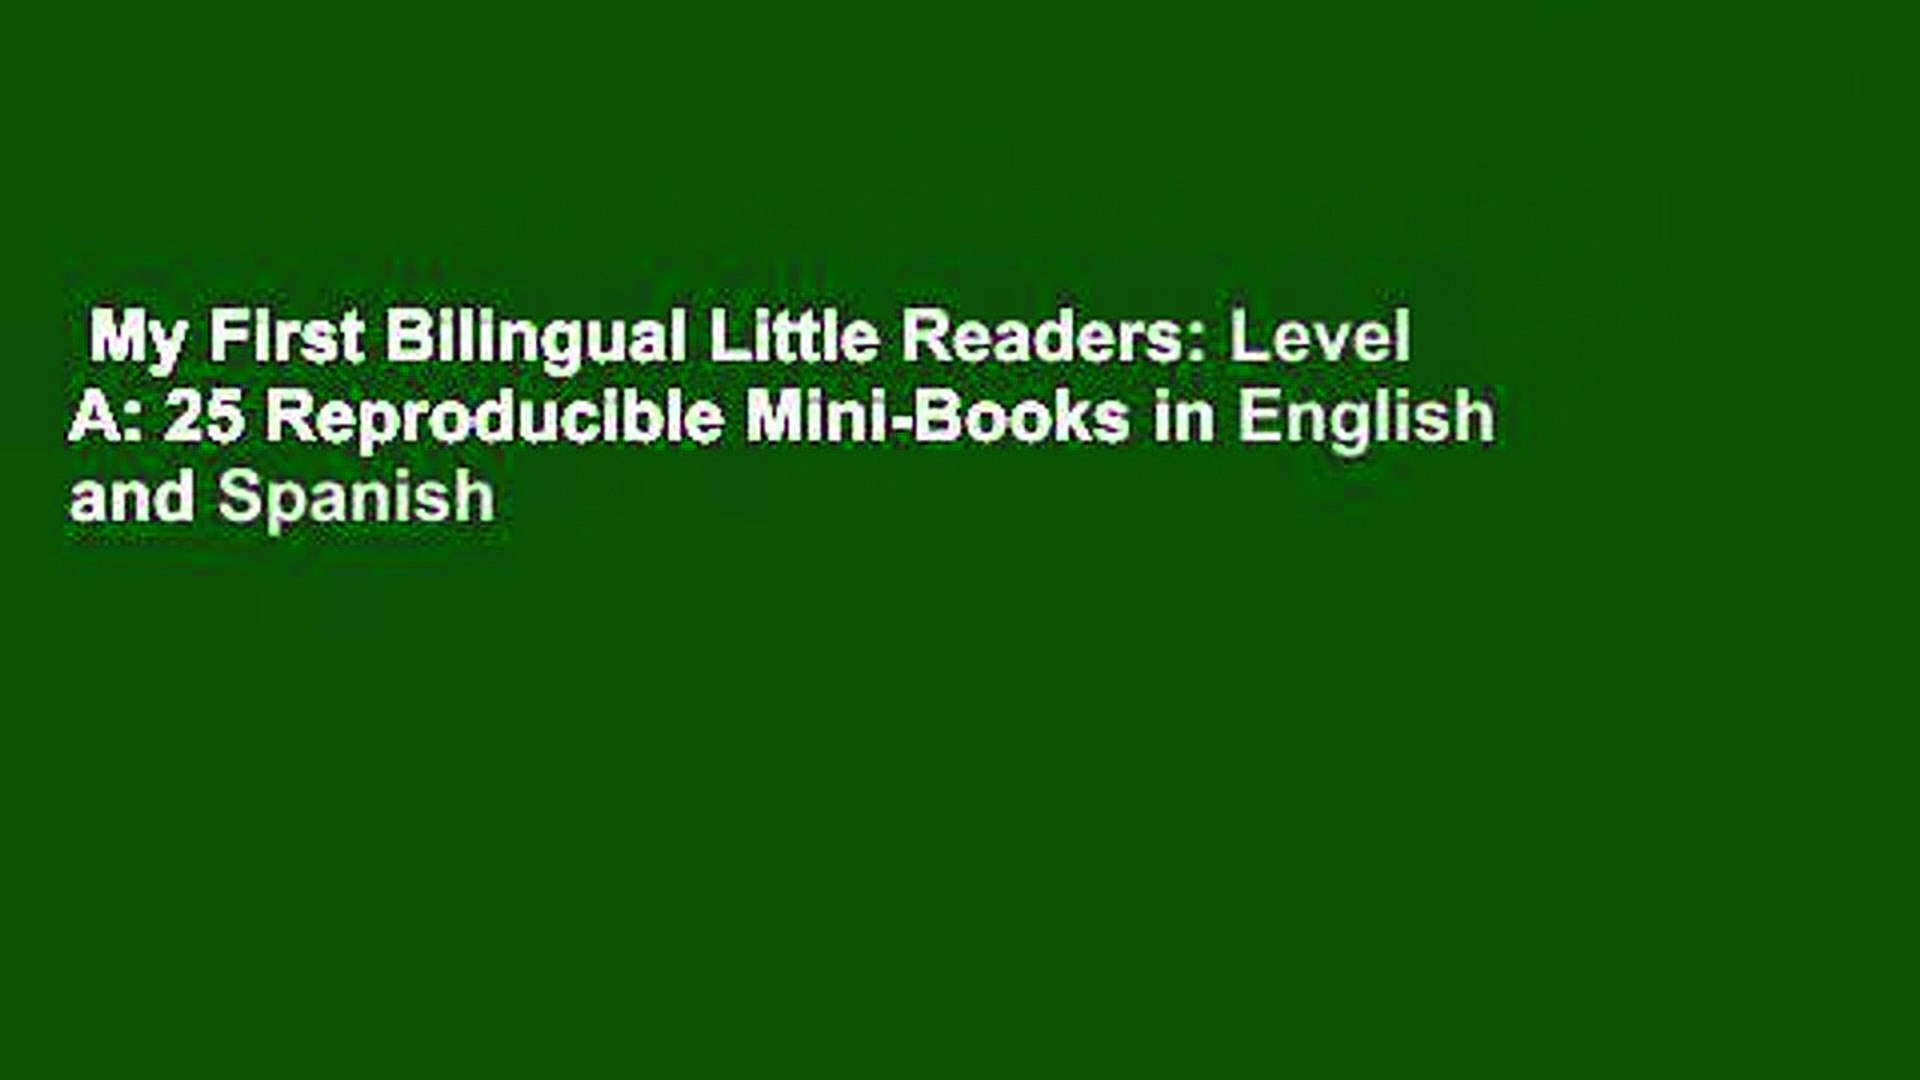 My First Bilingual Little Readers: Level A: 25 Reproducible Mini-Books in English and Spanish